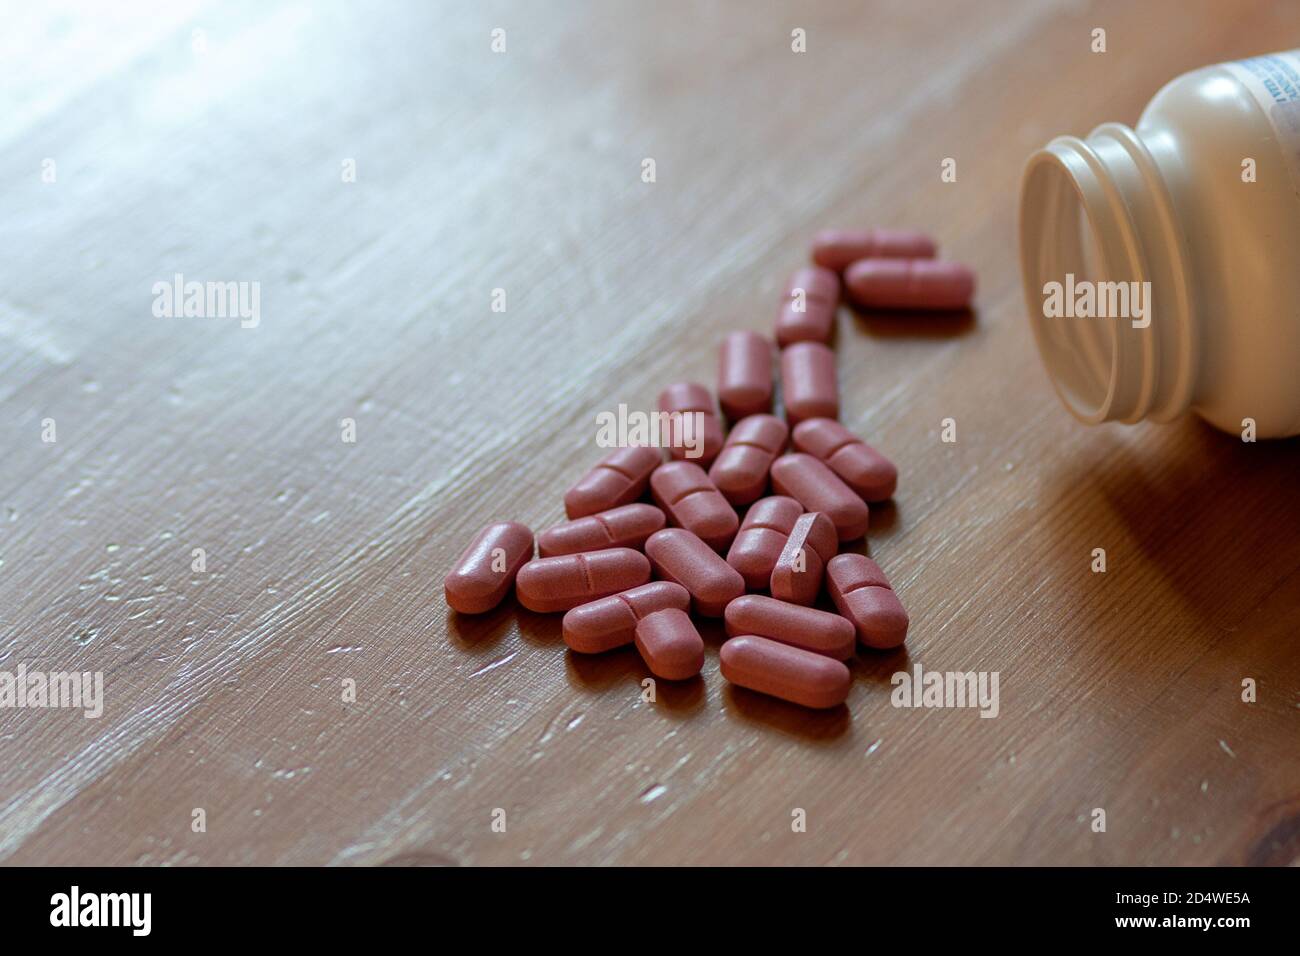 red multivitamin pills on a wooden table Stock Photo